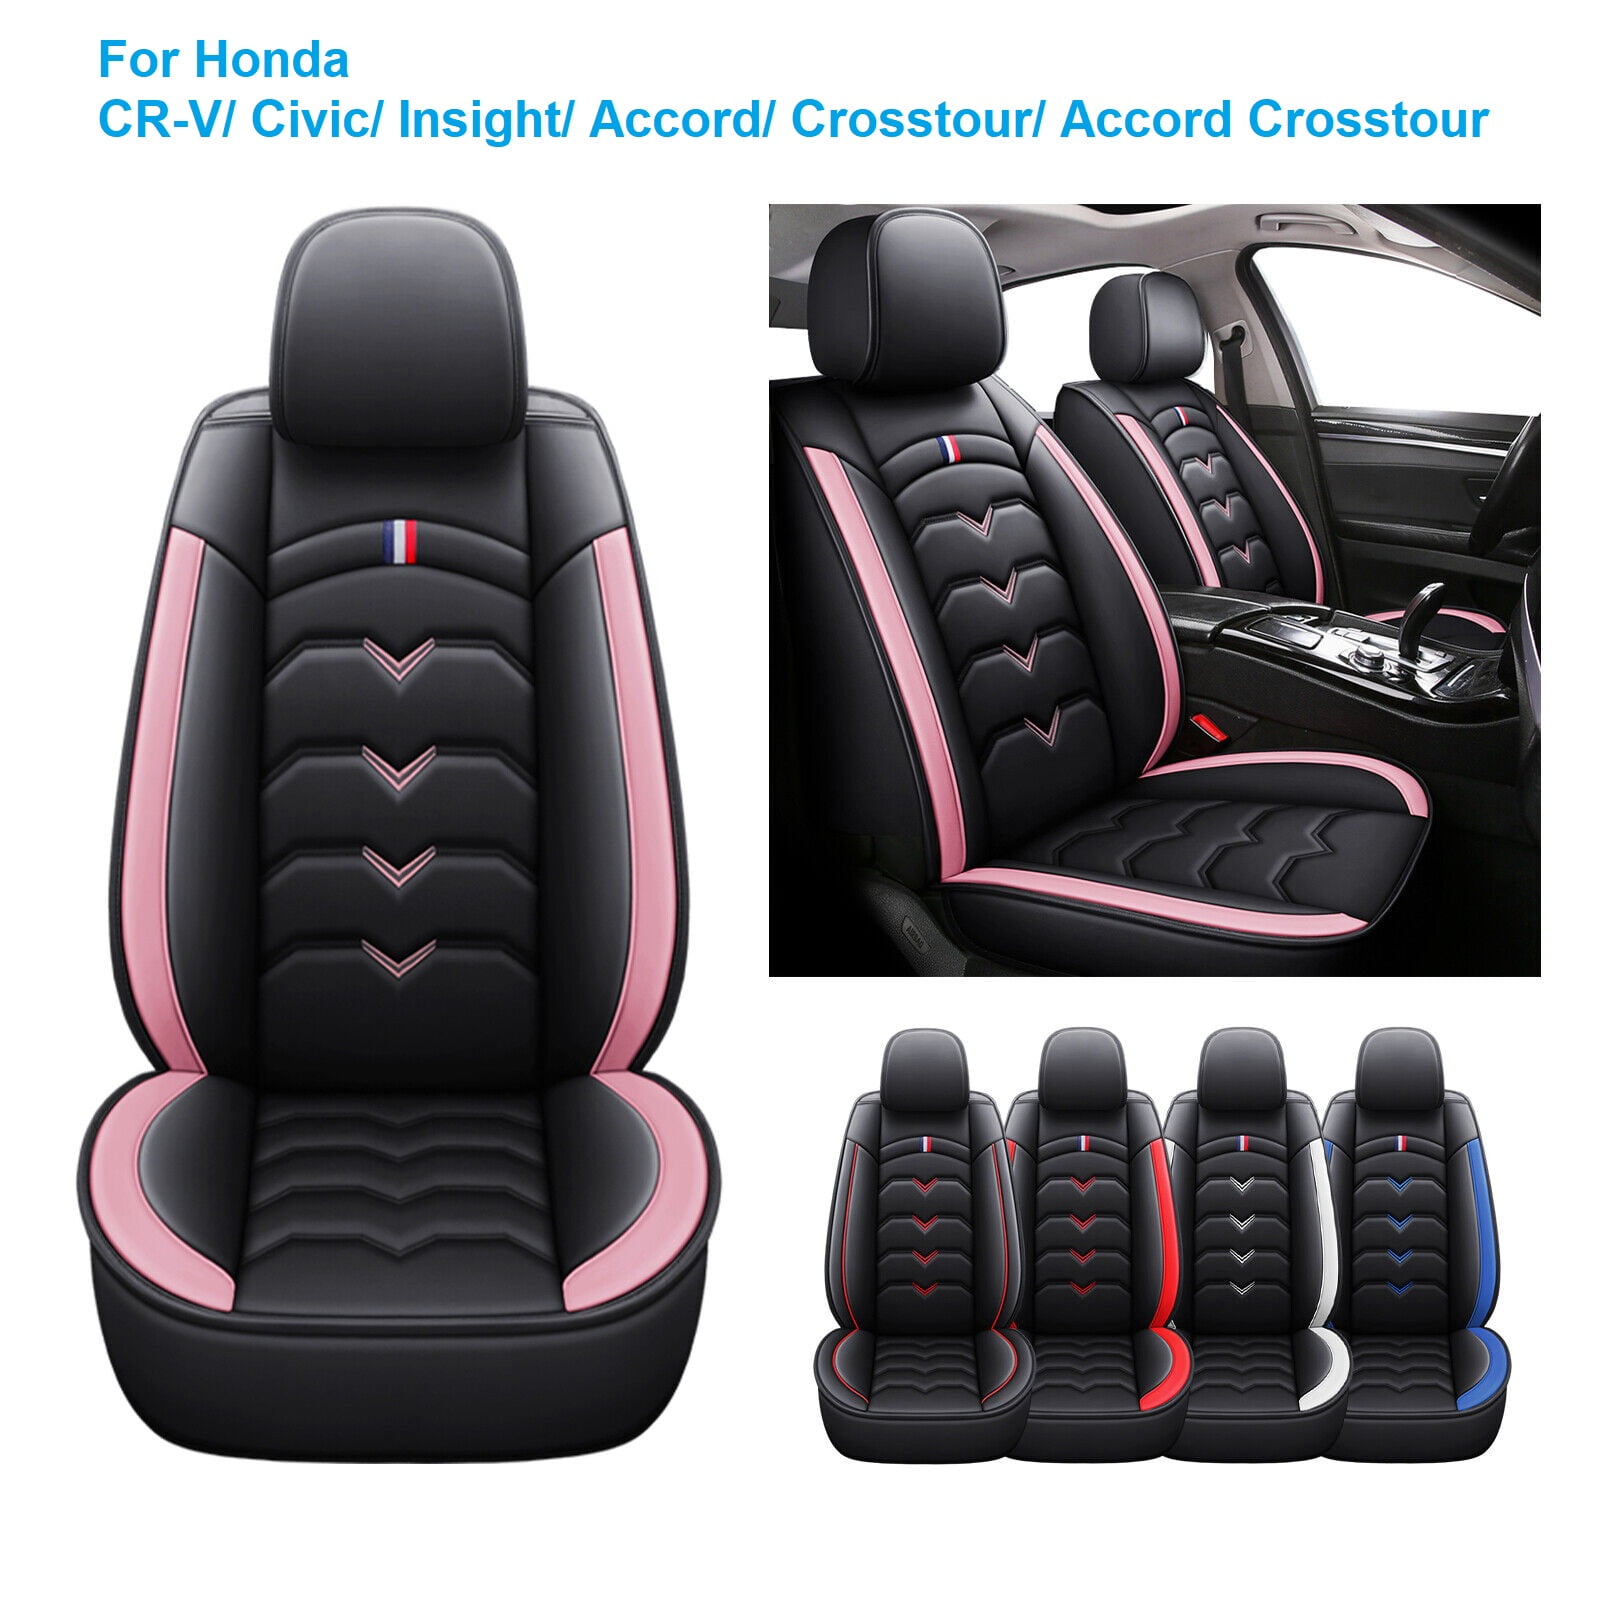 Car Seat Covers for Honda CR-V Civic Insight Accord Crosstour, Premium  Leather Cushion Protector, 5 Seats Front Rear Full Set Black+Pink